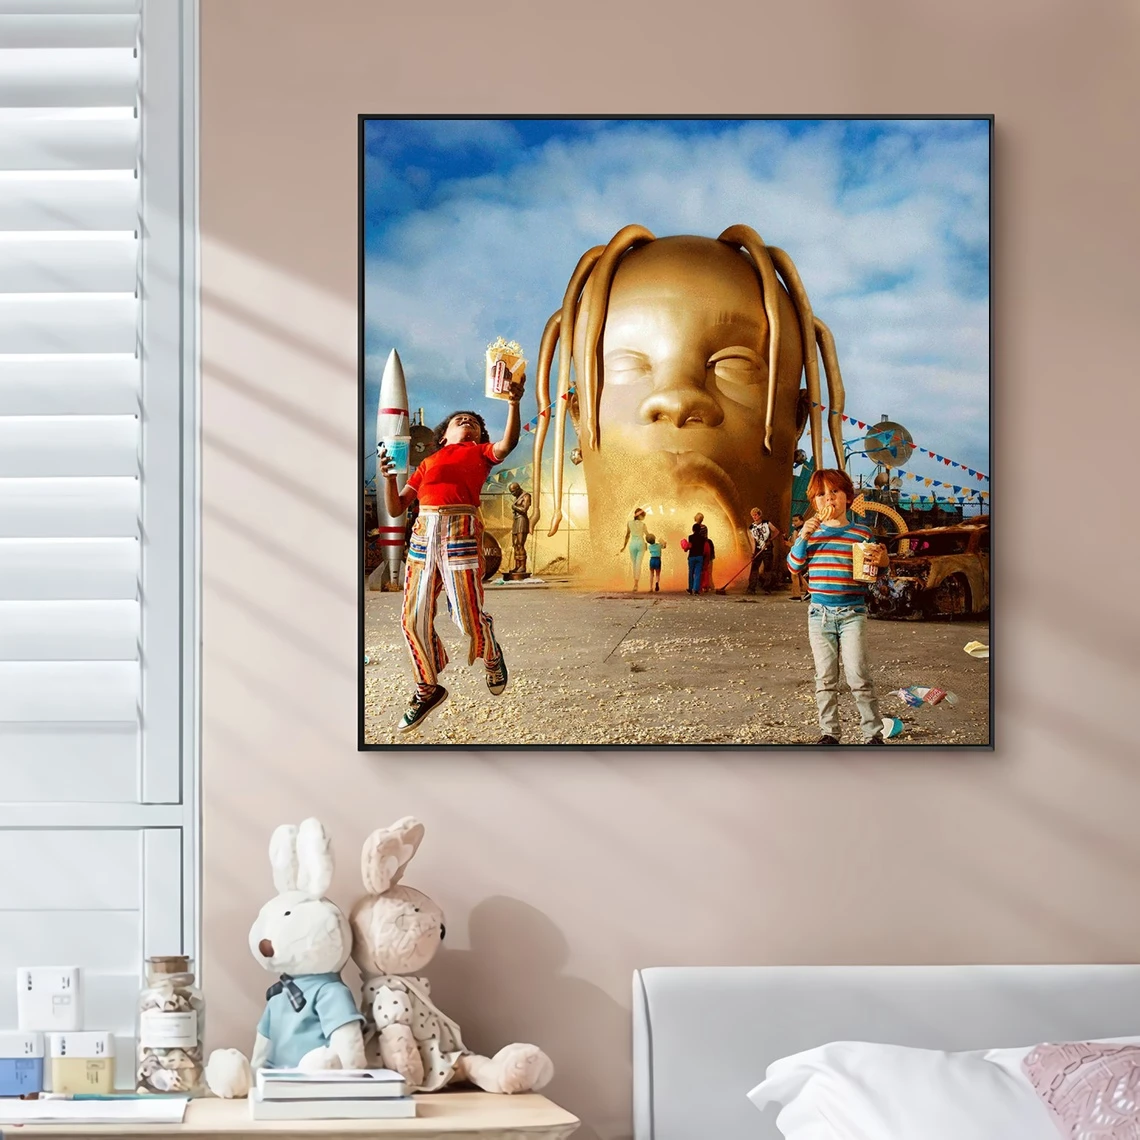 Travis Scott Rapper Wall Hanging Music Album Astroworld Poster Wall Tapestry 